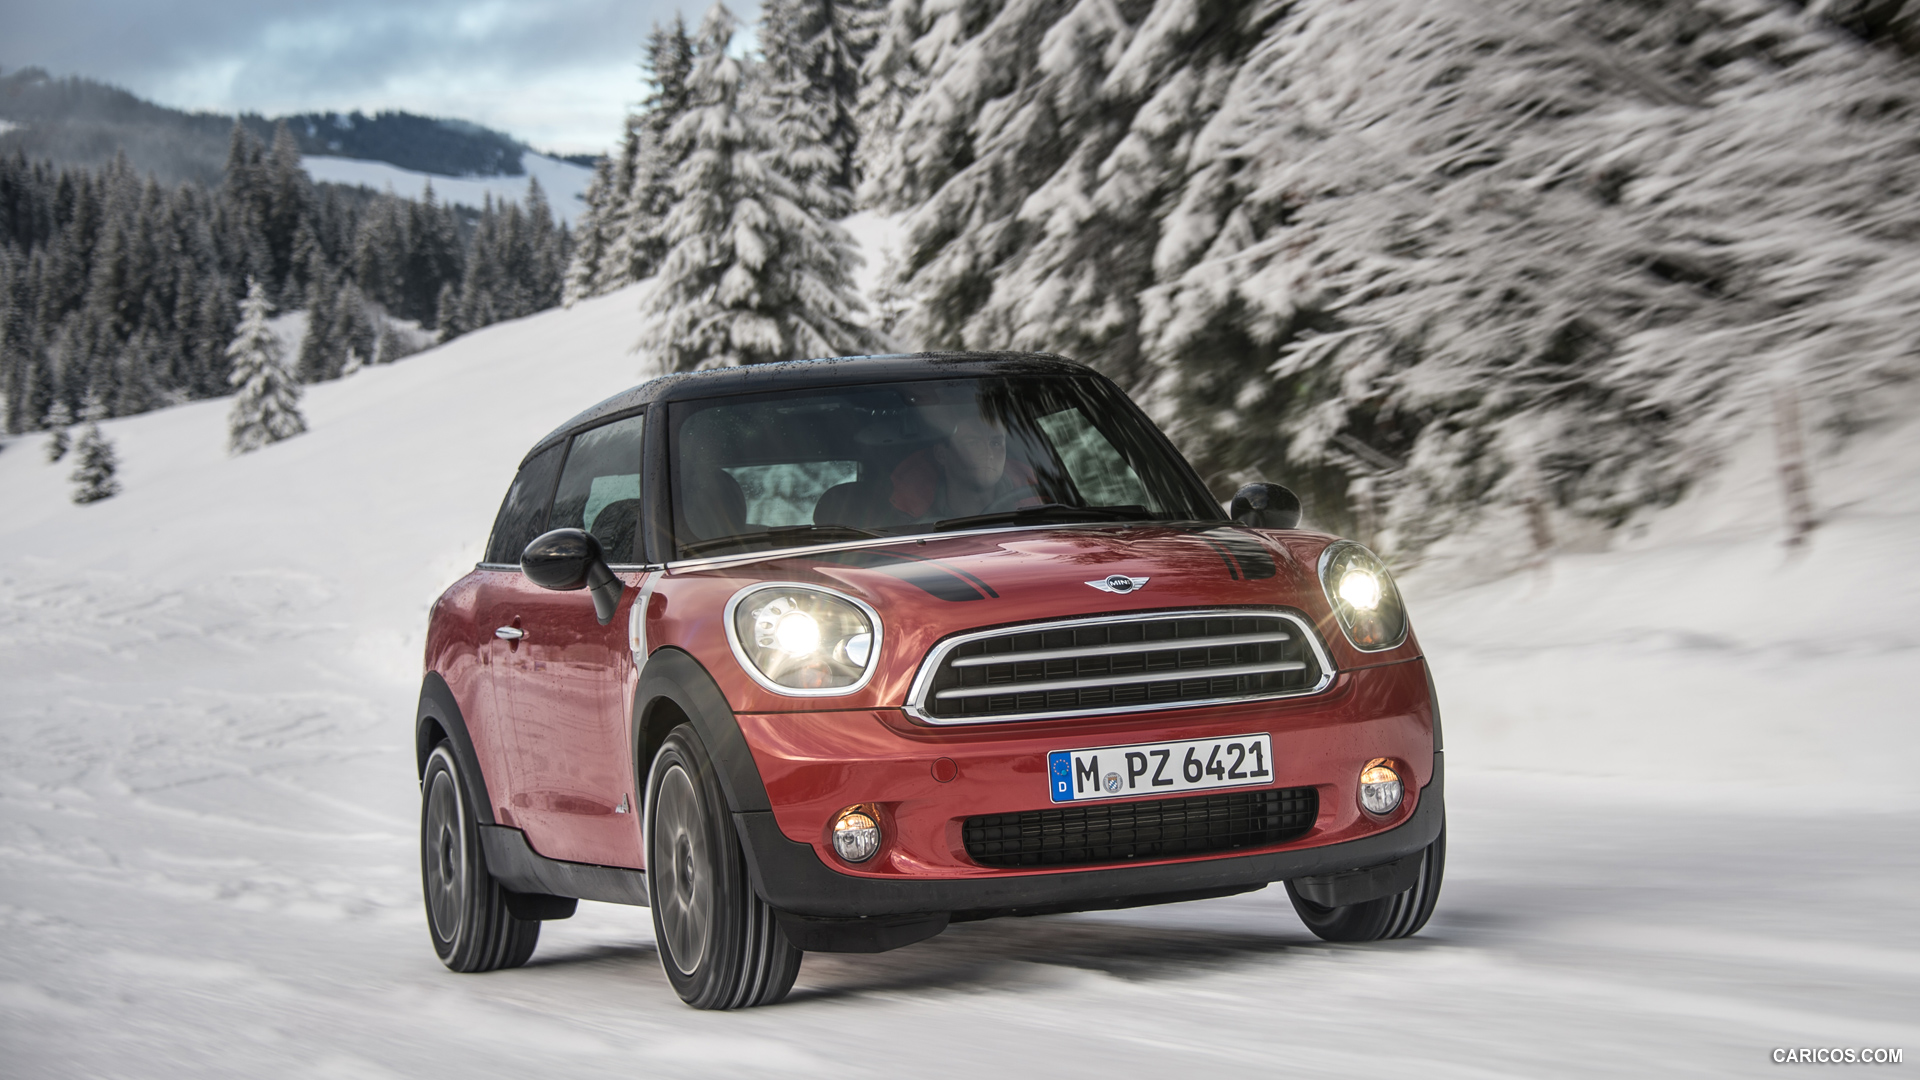 2014 MINI Cooper D Paceman ALL4 in Snow - Front, #2 of 25